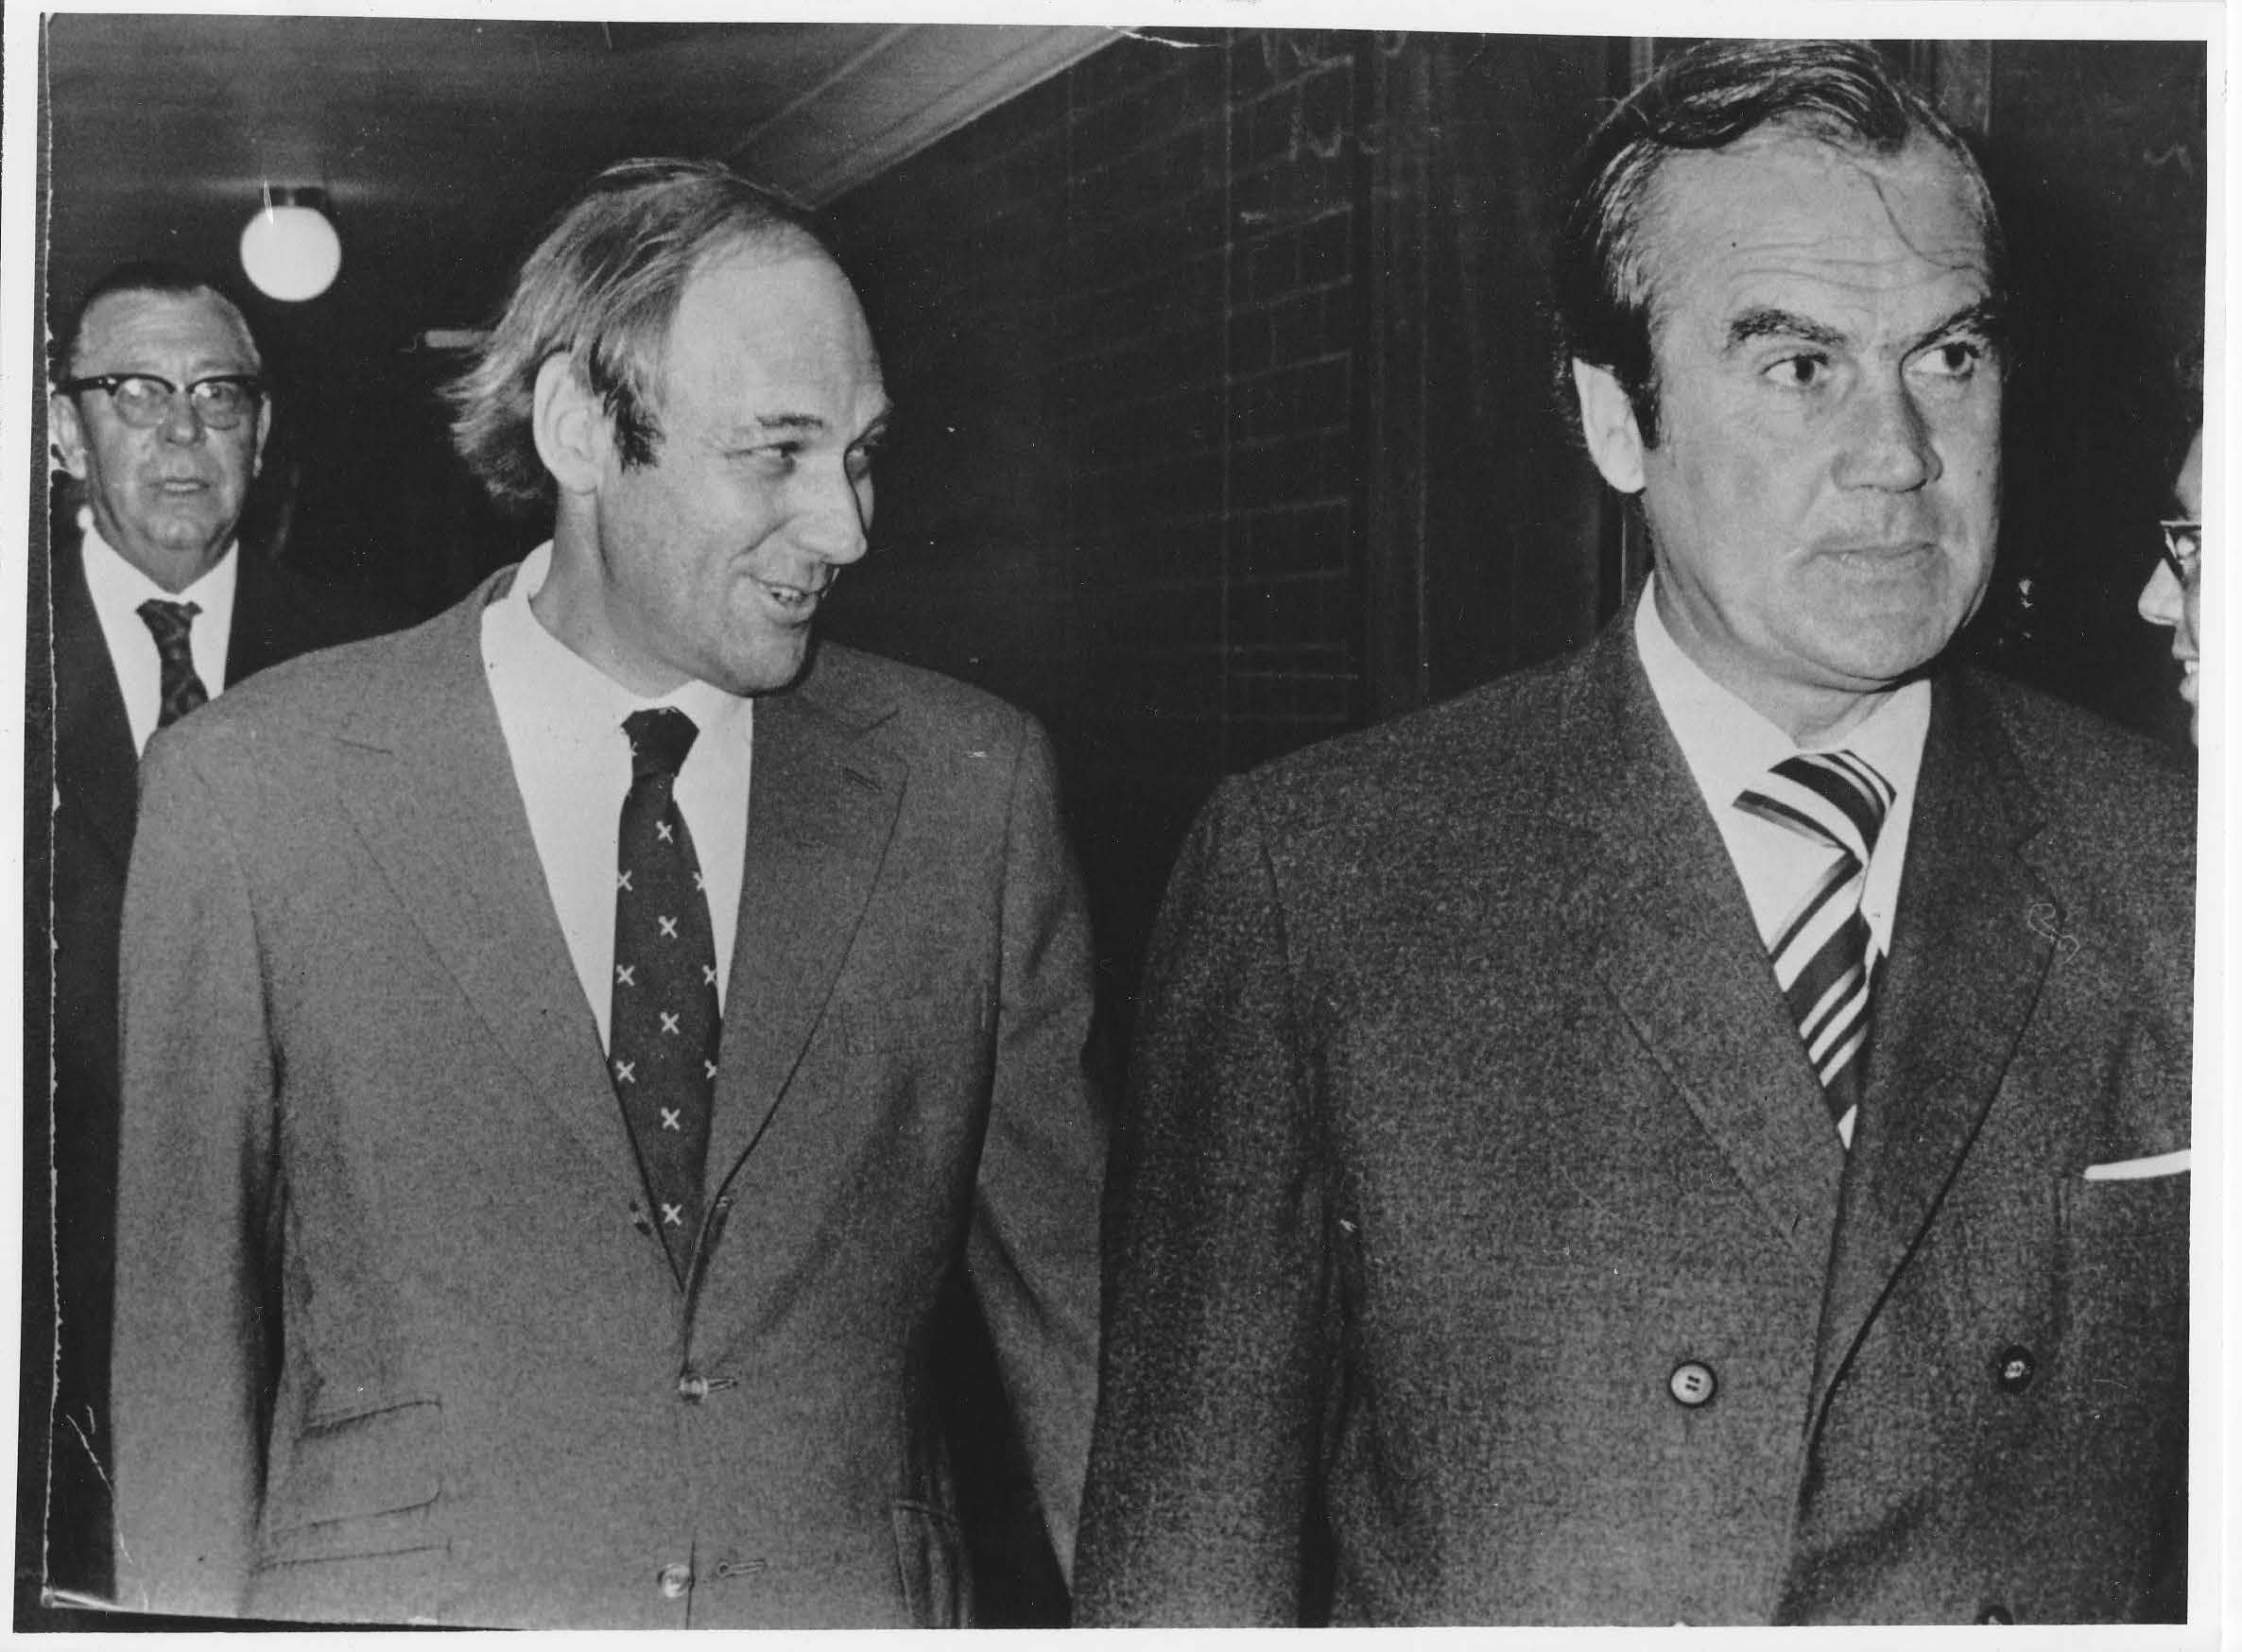 Michael Green (left) in 1974, when he was senior assistant editor of the Daily News, with then-editor John O'Malley